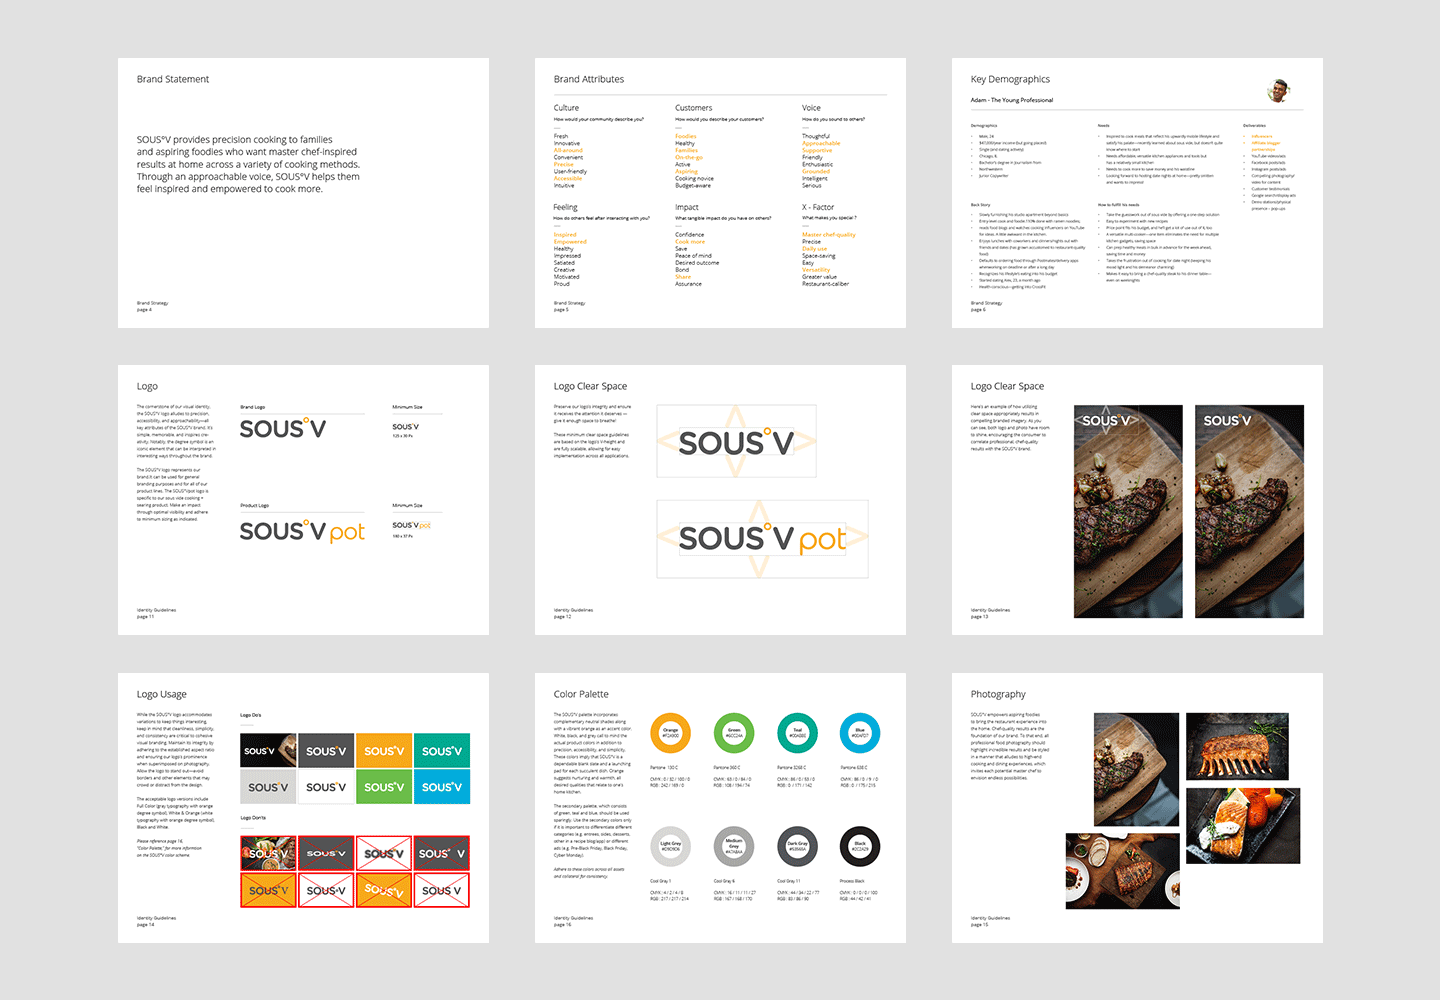 Showing SOUSv brand identity and brand guideline 